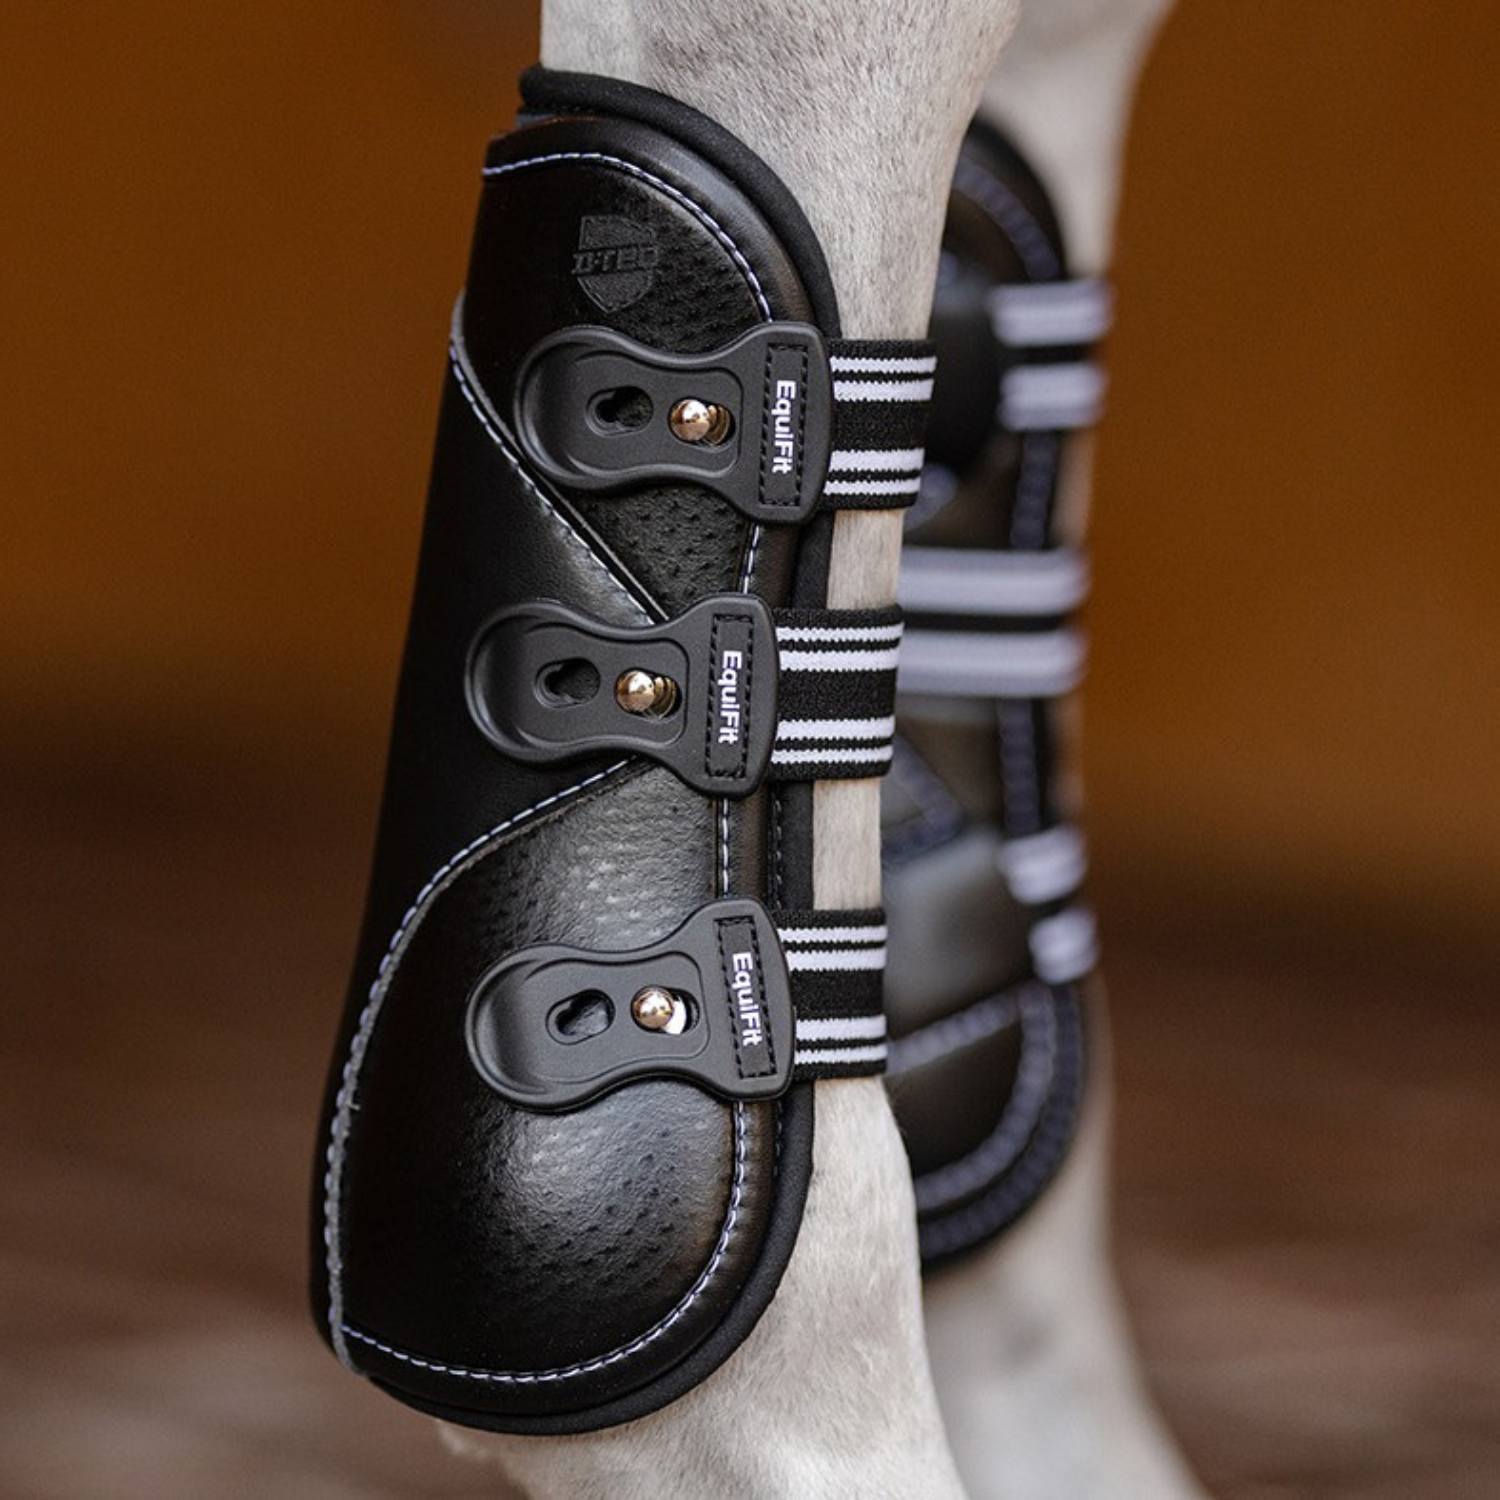 Choosing the right boots for your horse